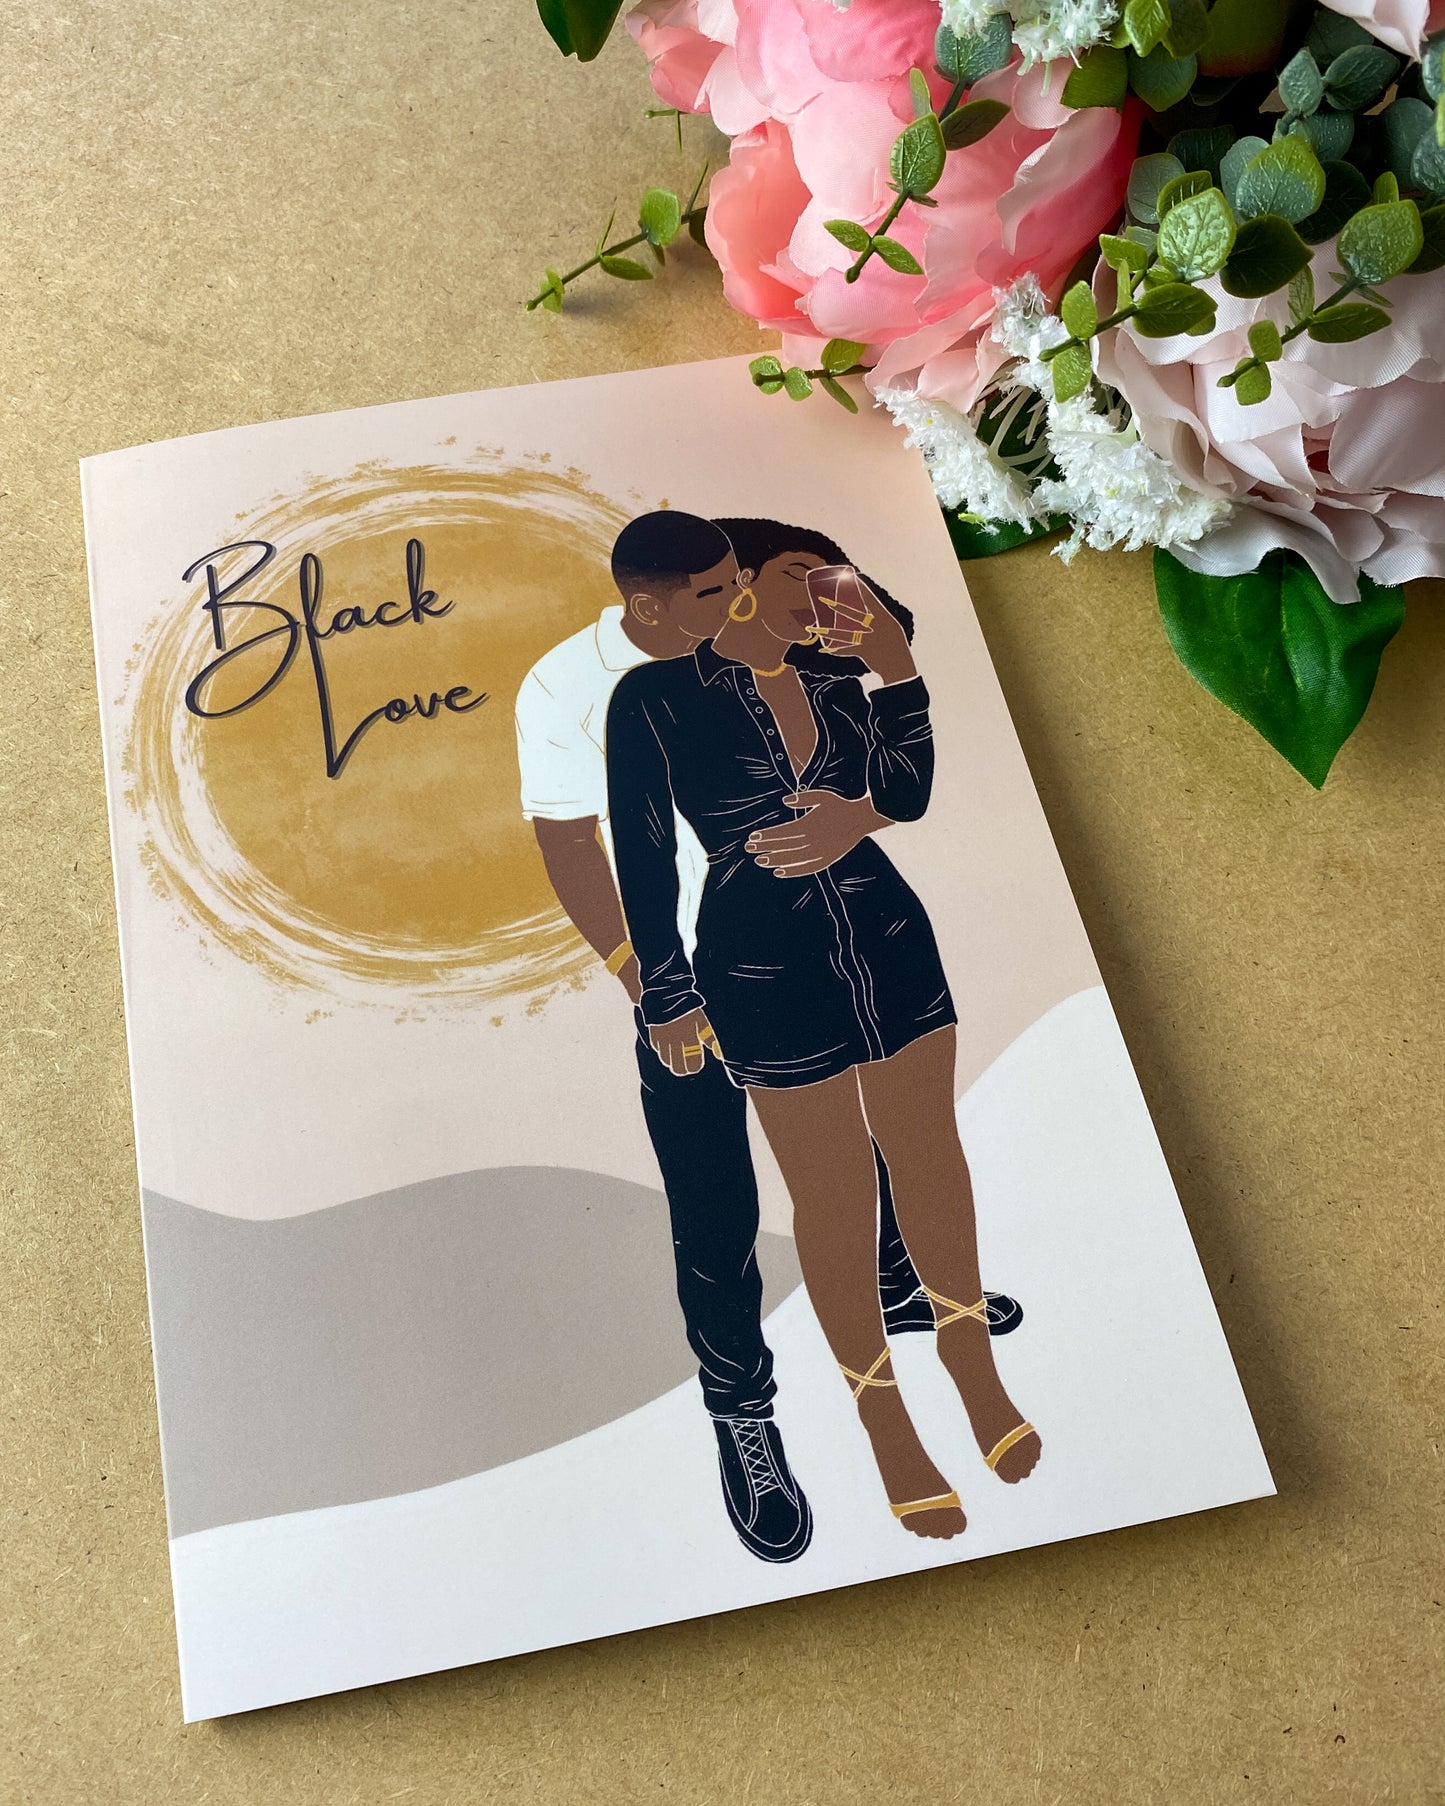 Selfie Lover’s Black Love Couple Greetings Card Mixed Race